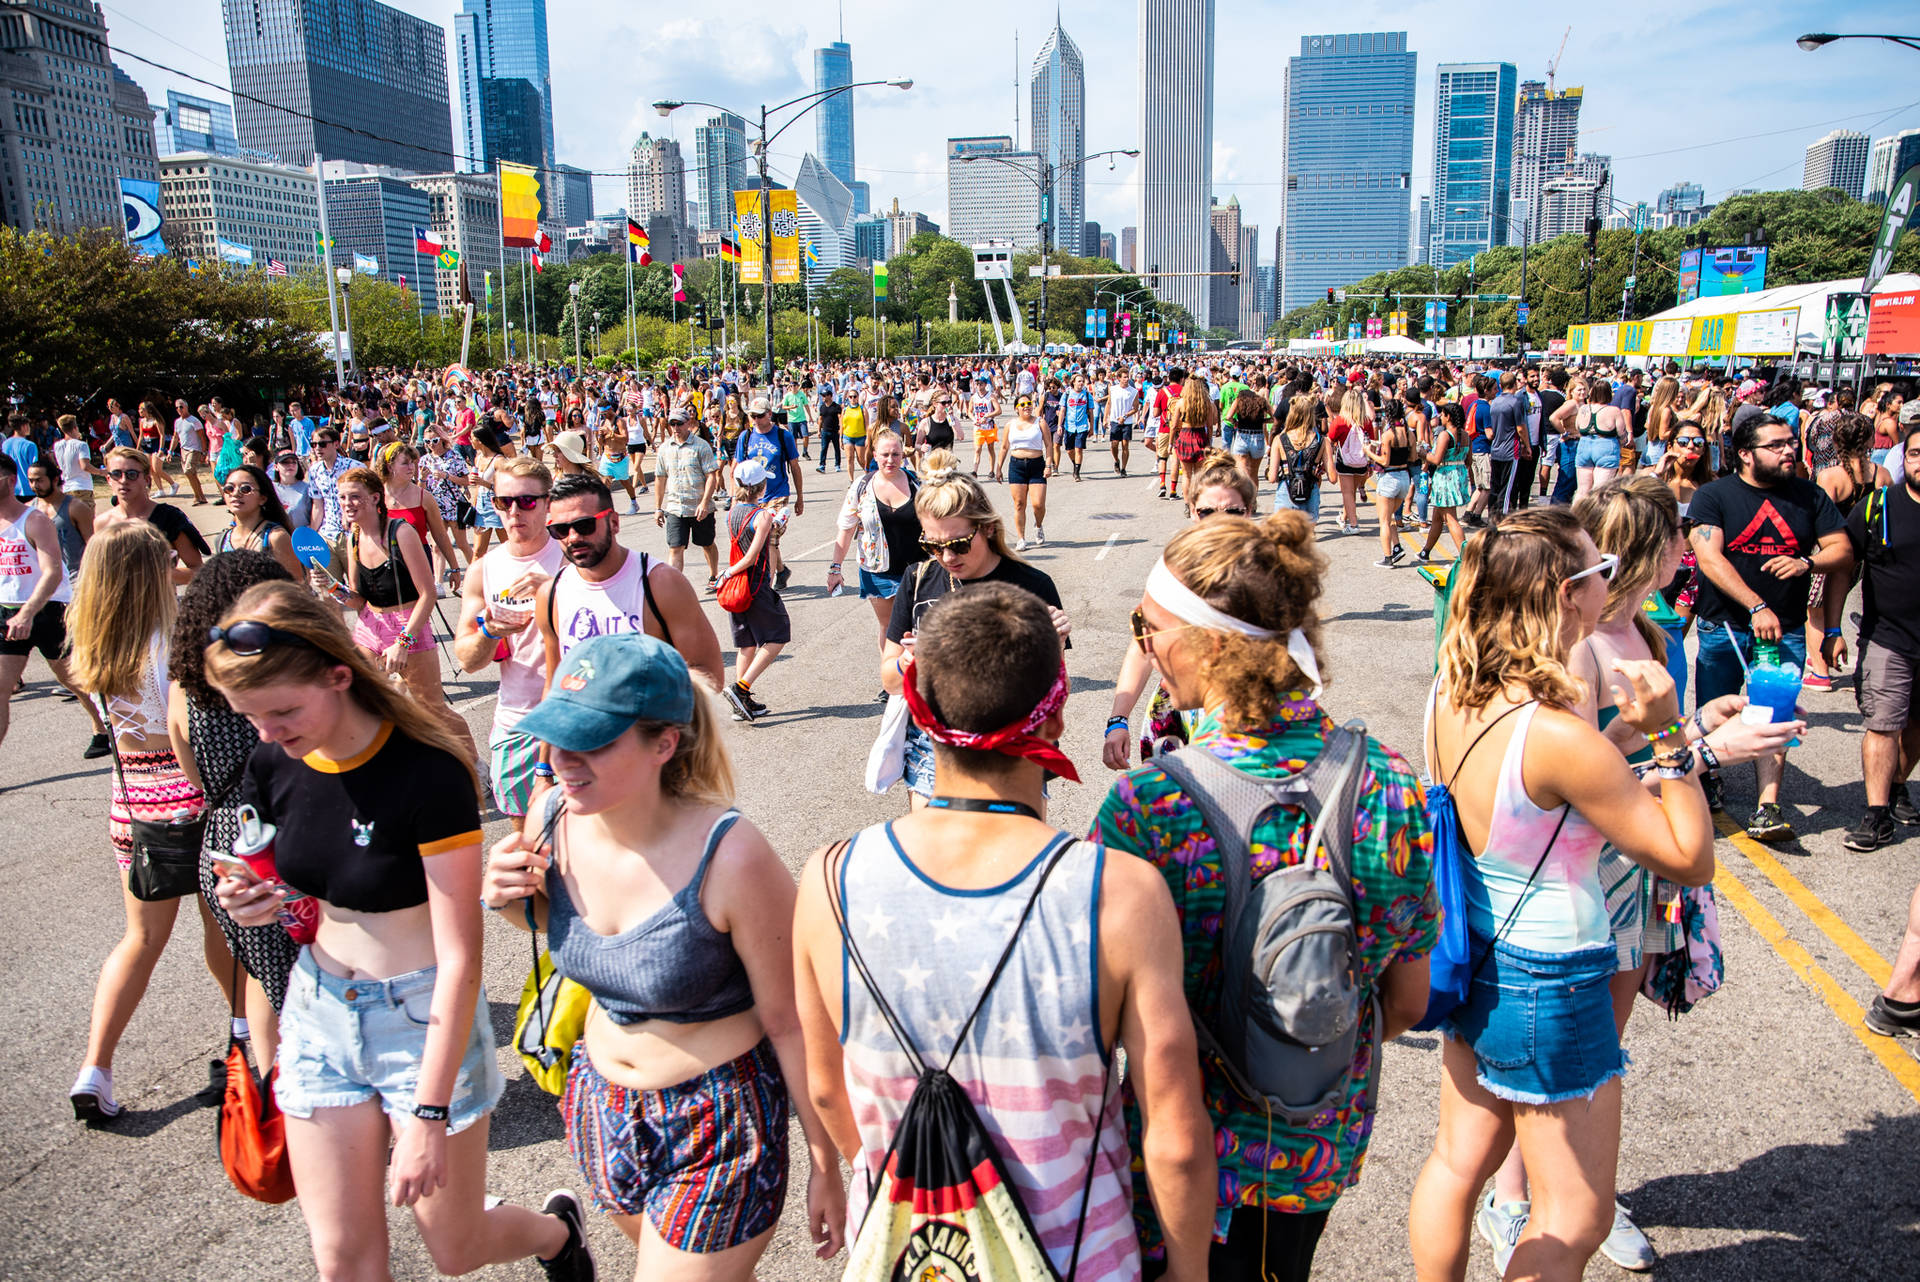 Join In On The Fun And Excitement At Lollapalooza Music Festival! Background